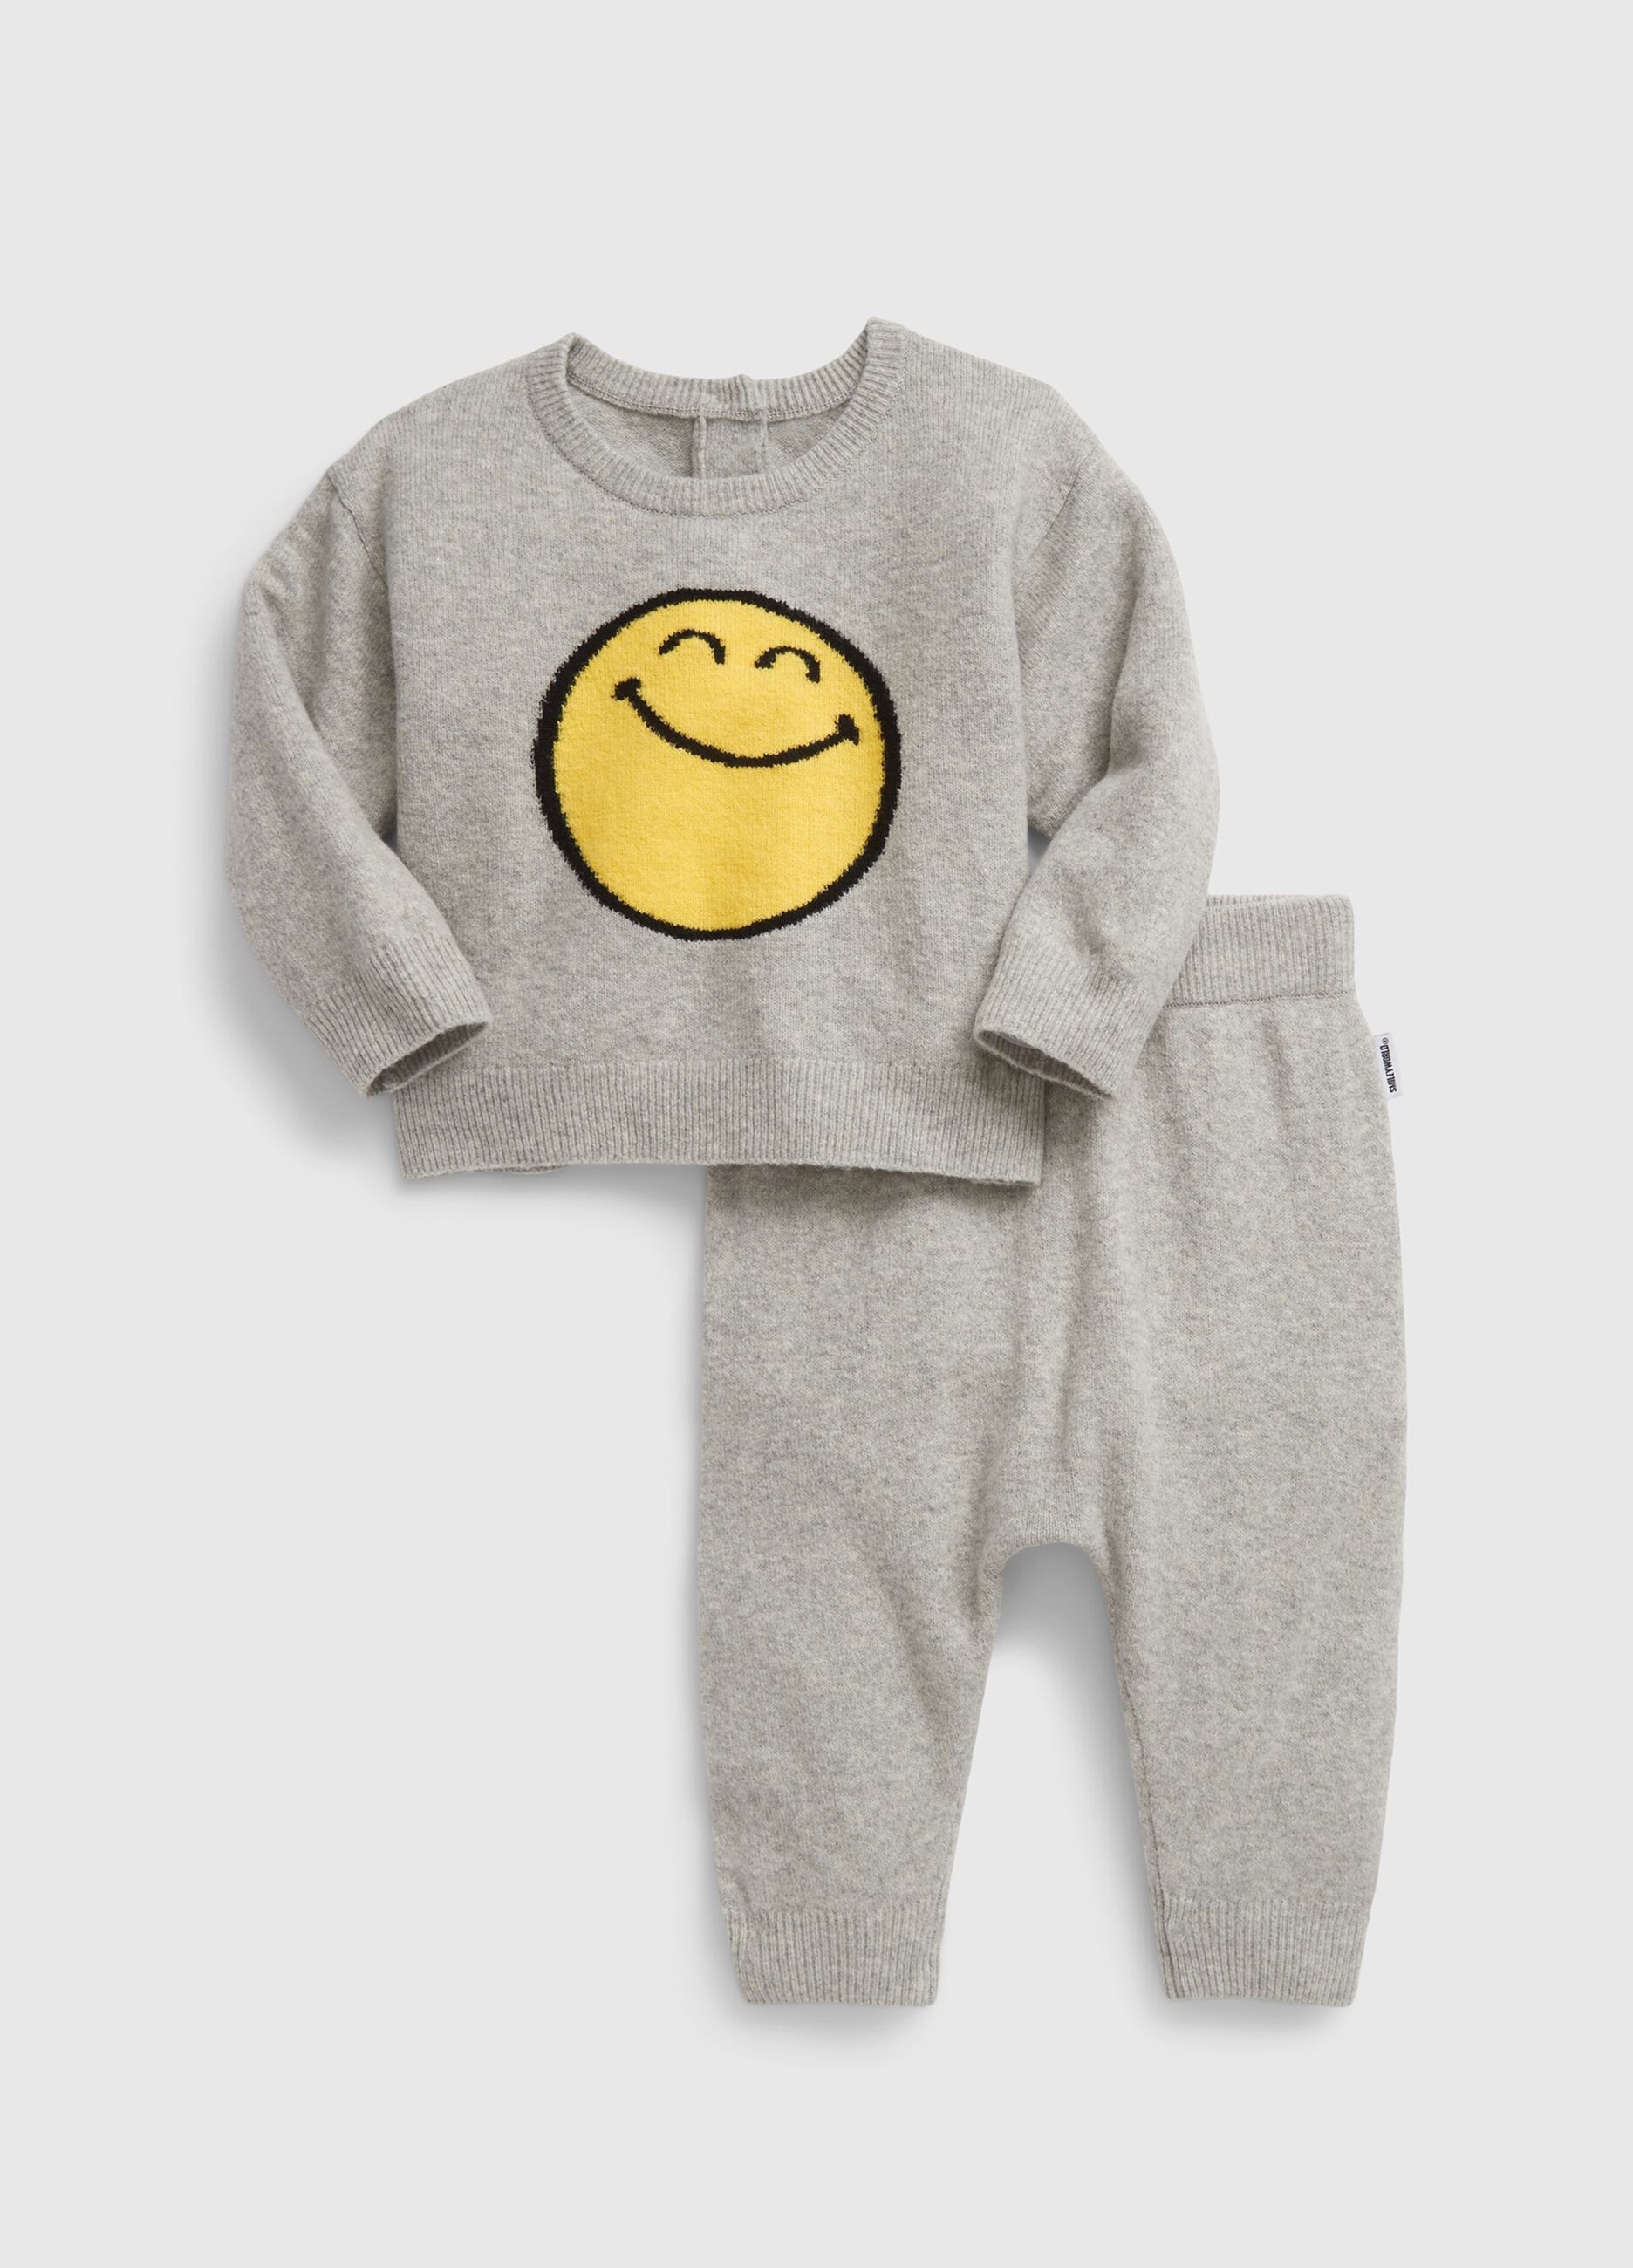 Smiley® top and trousers set